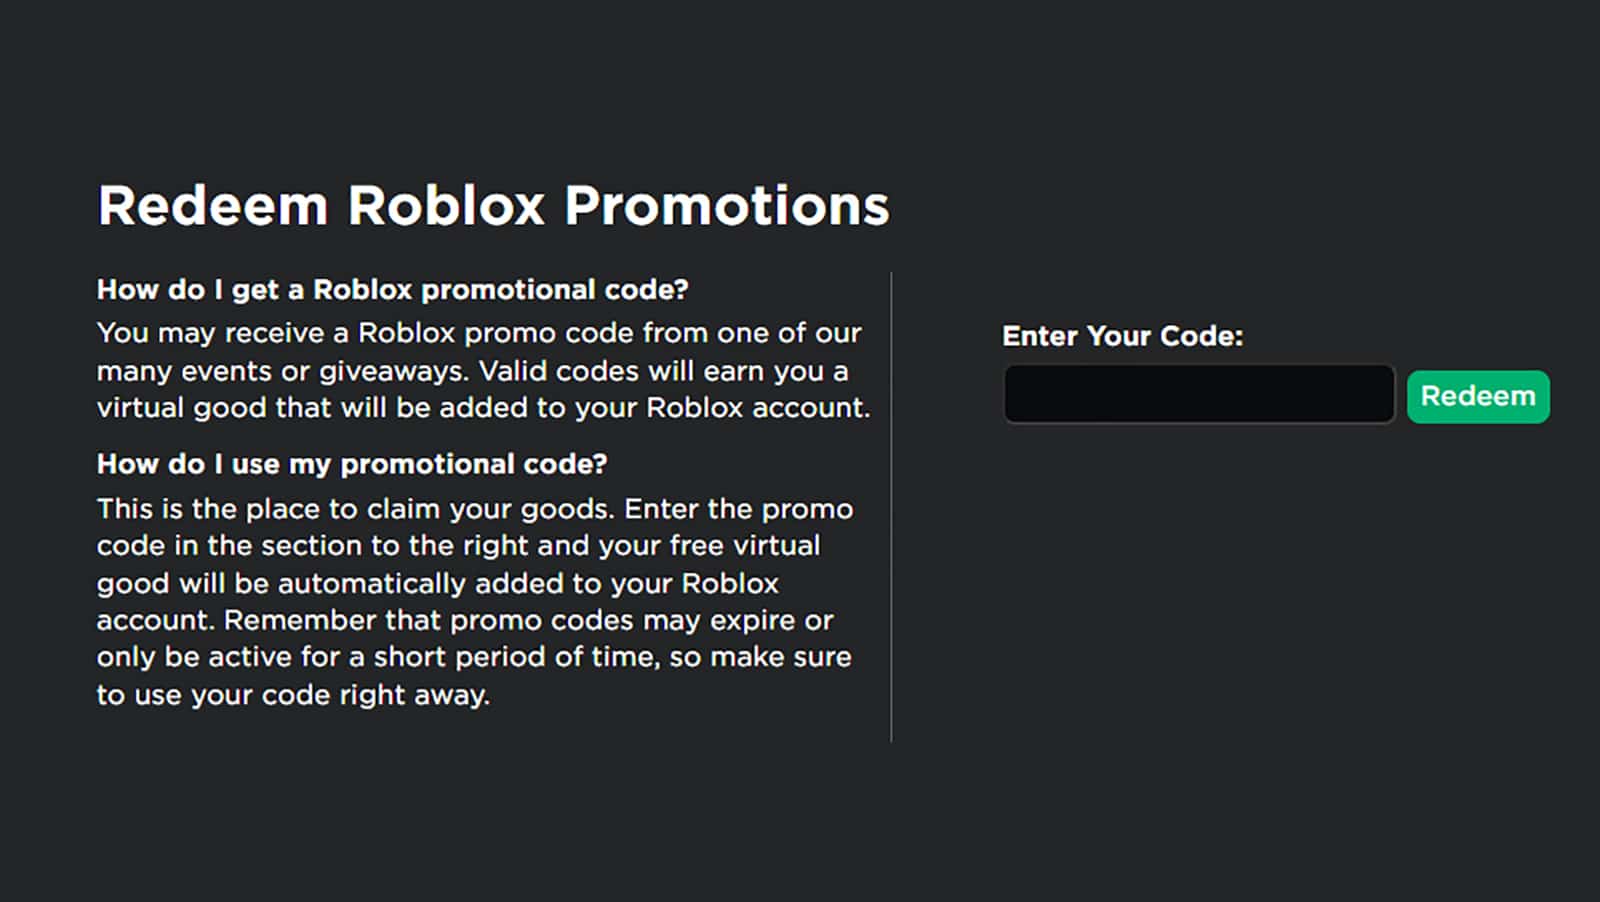 An image showing the location to tát enter promo codes in Roblox